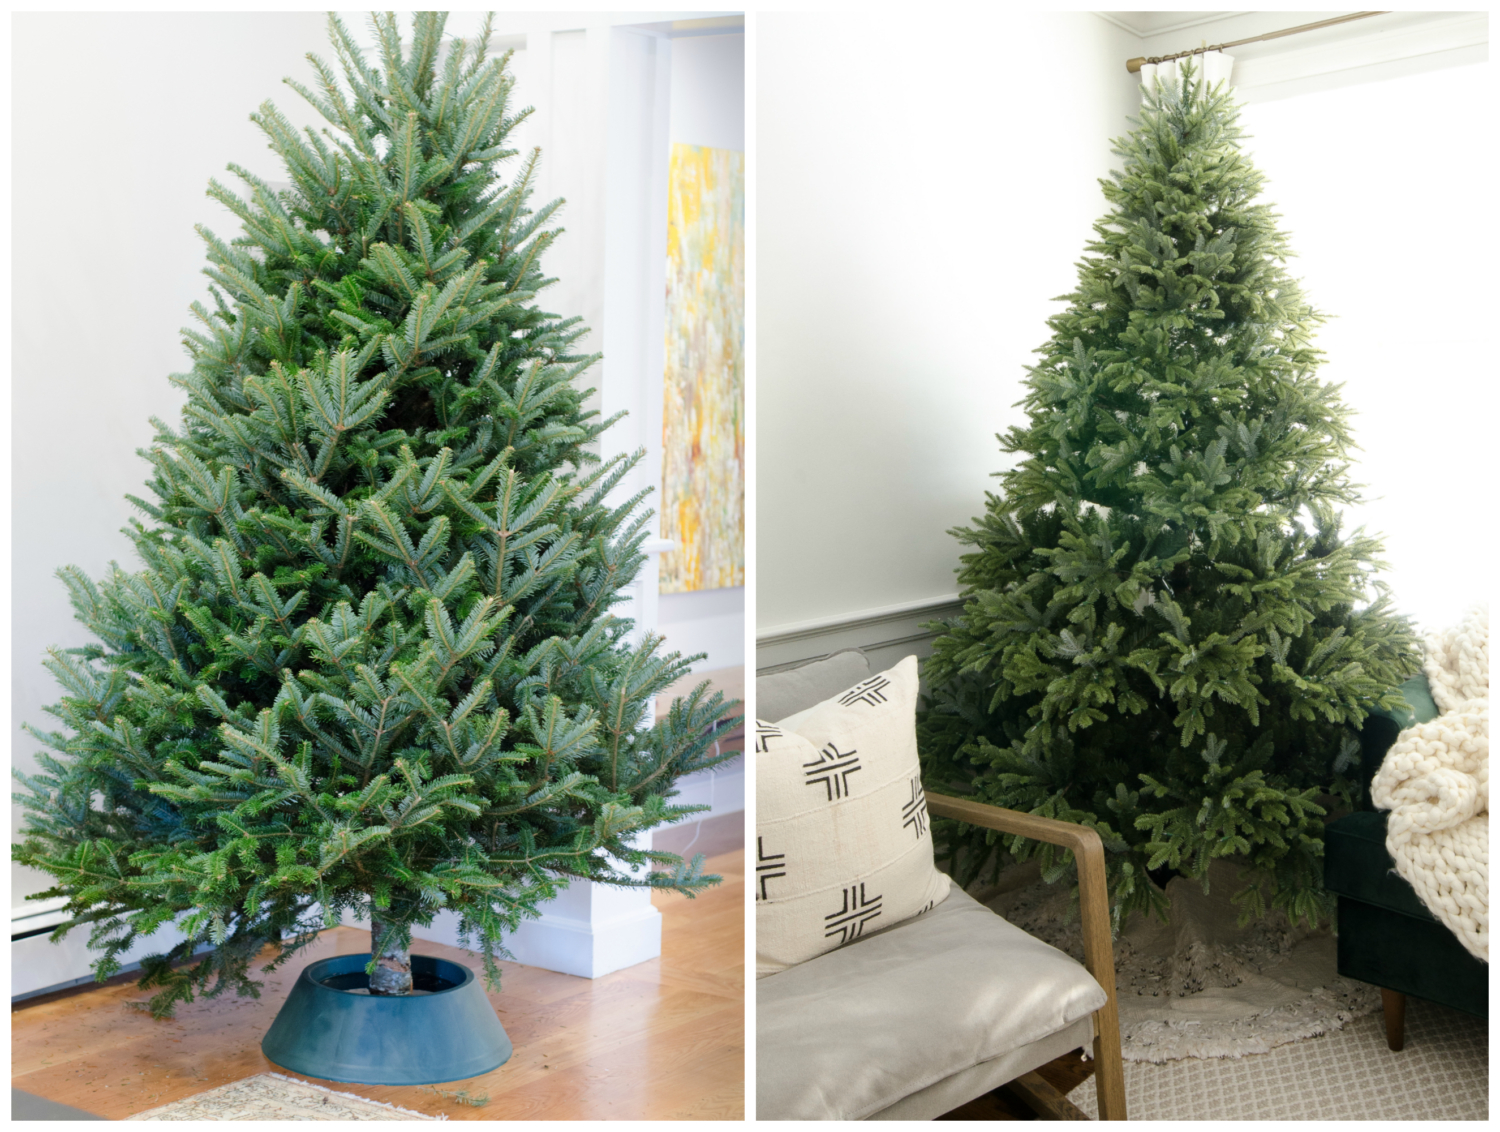 An honest side-by-side comparison of a real tree vs. a fake tree